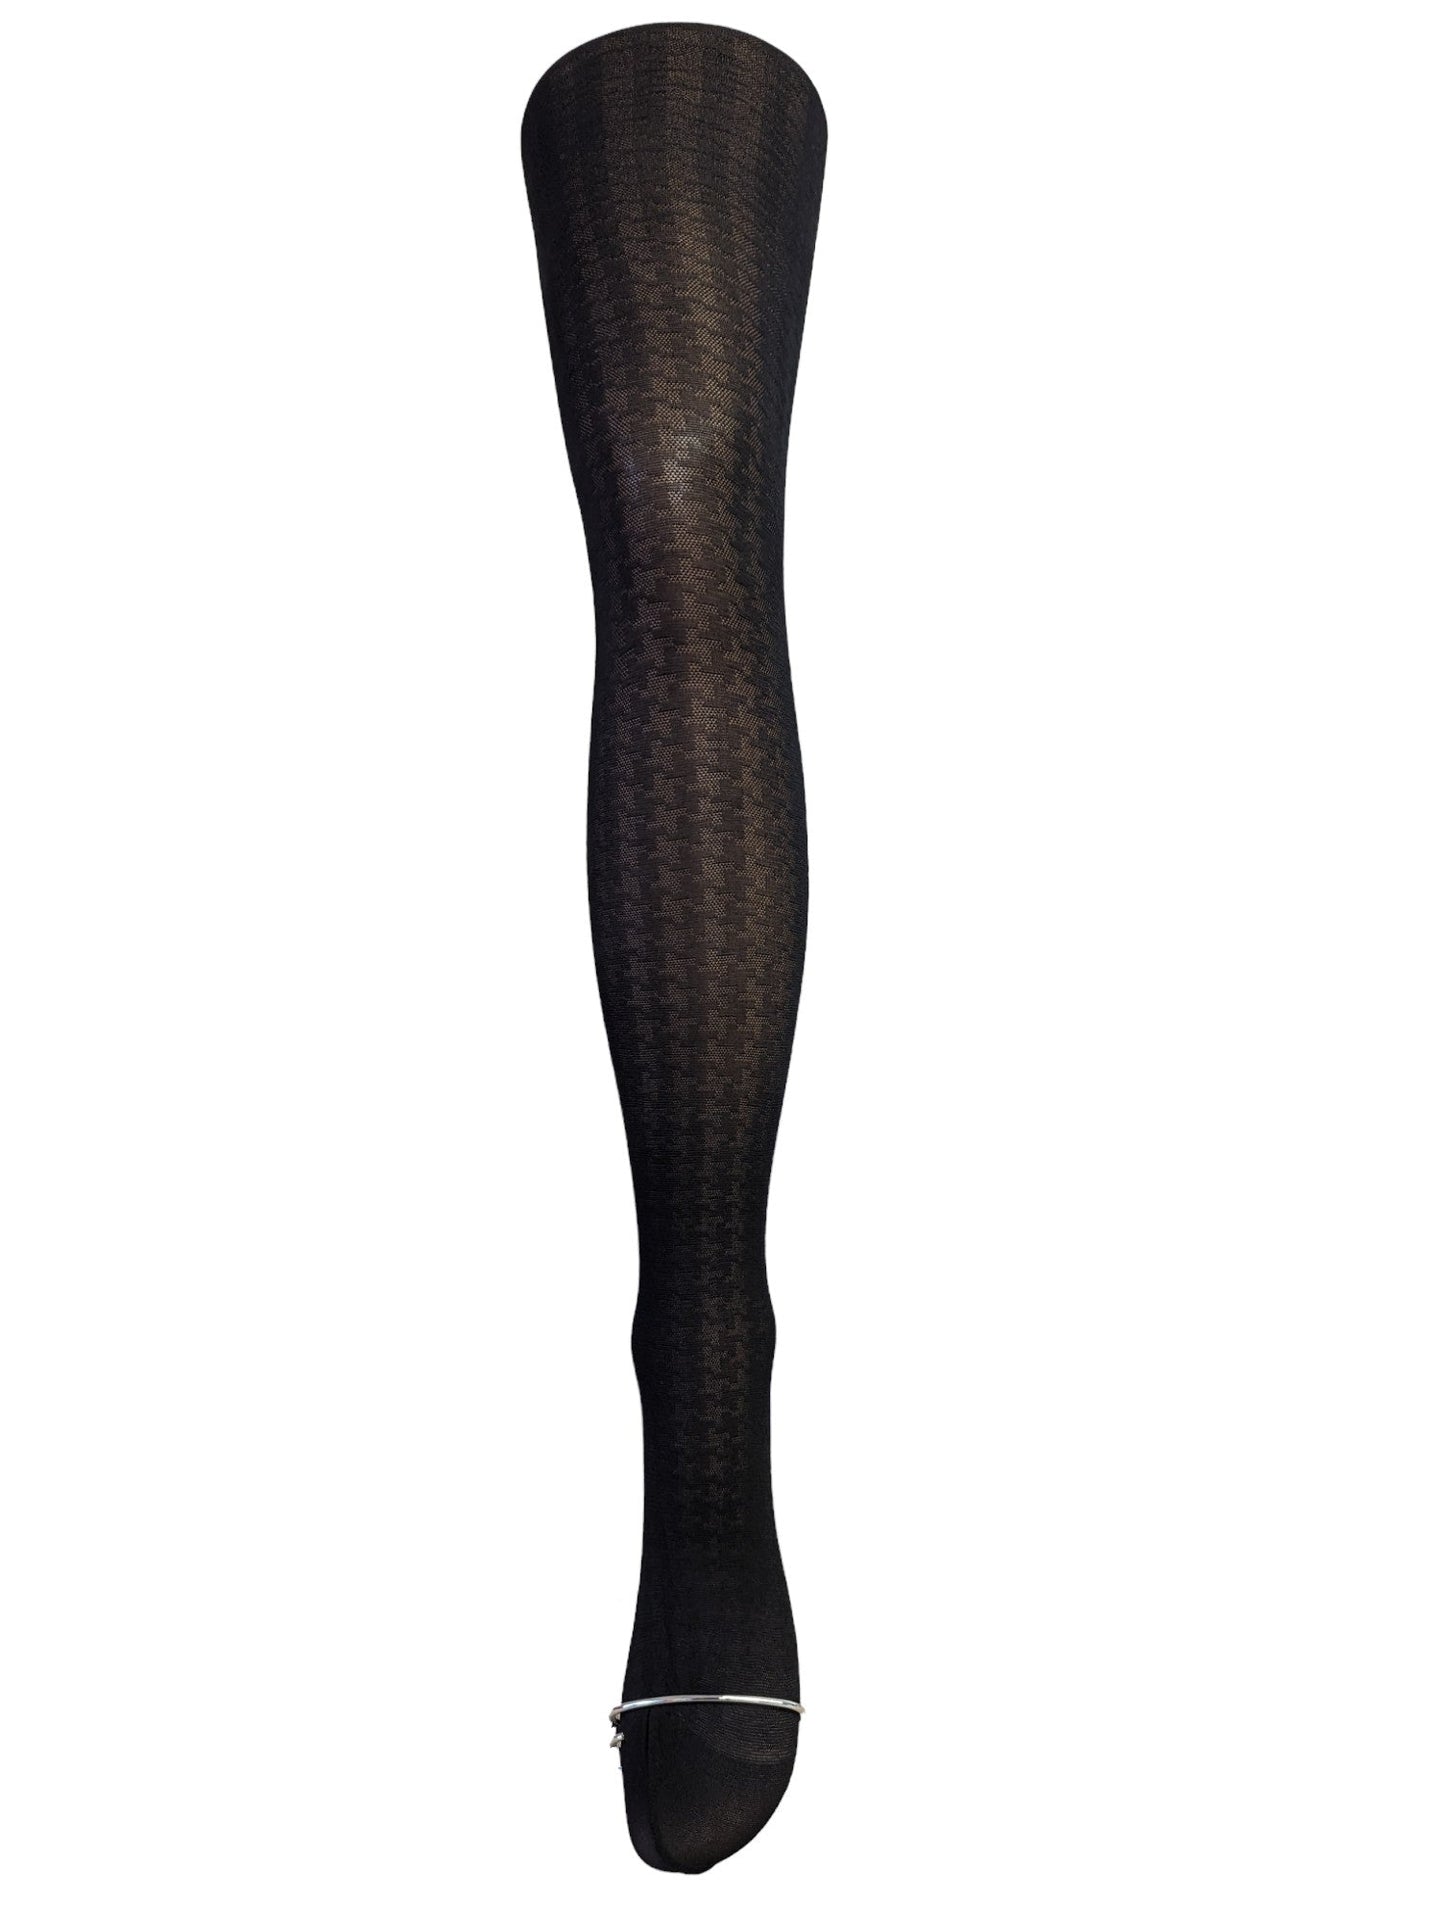 Dogtooth Pattern Tights